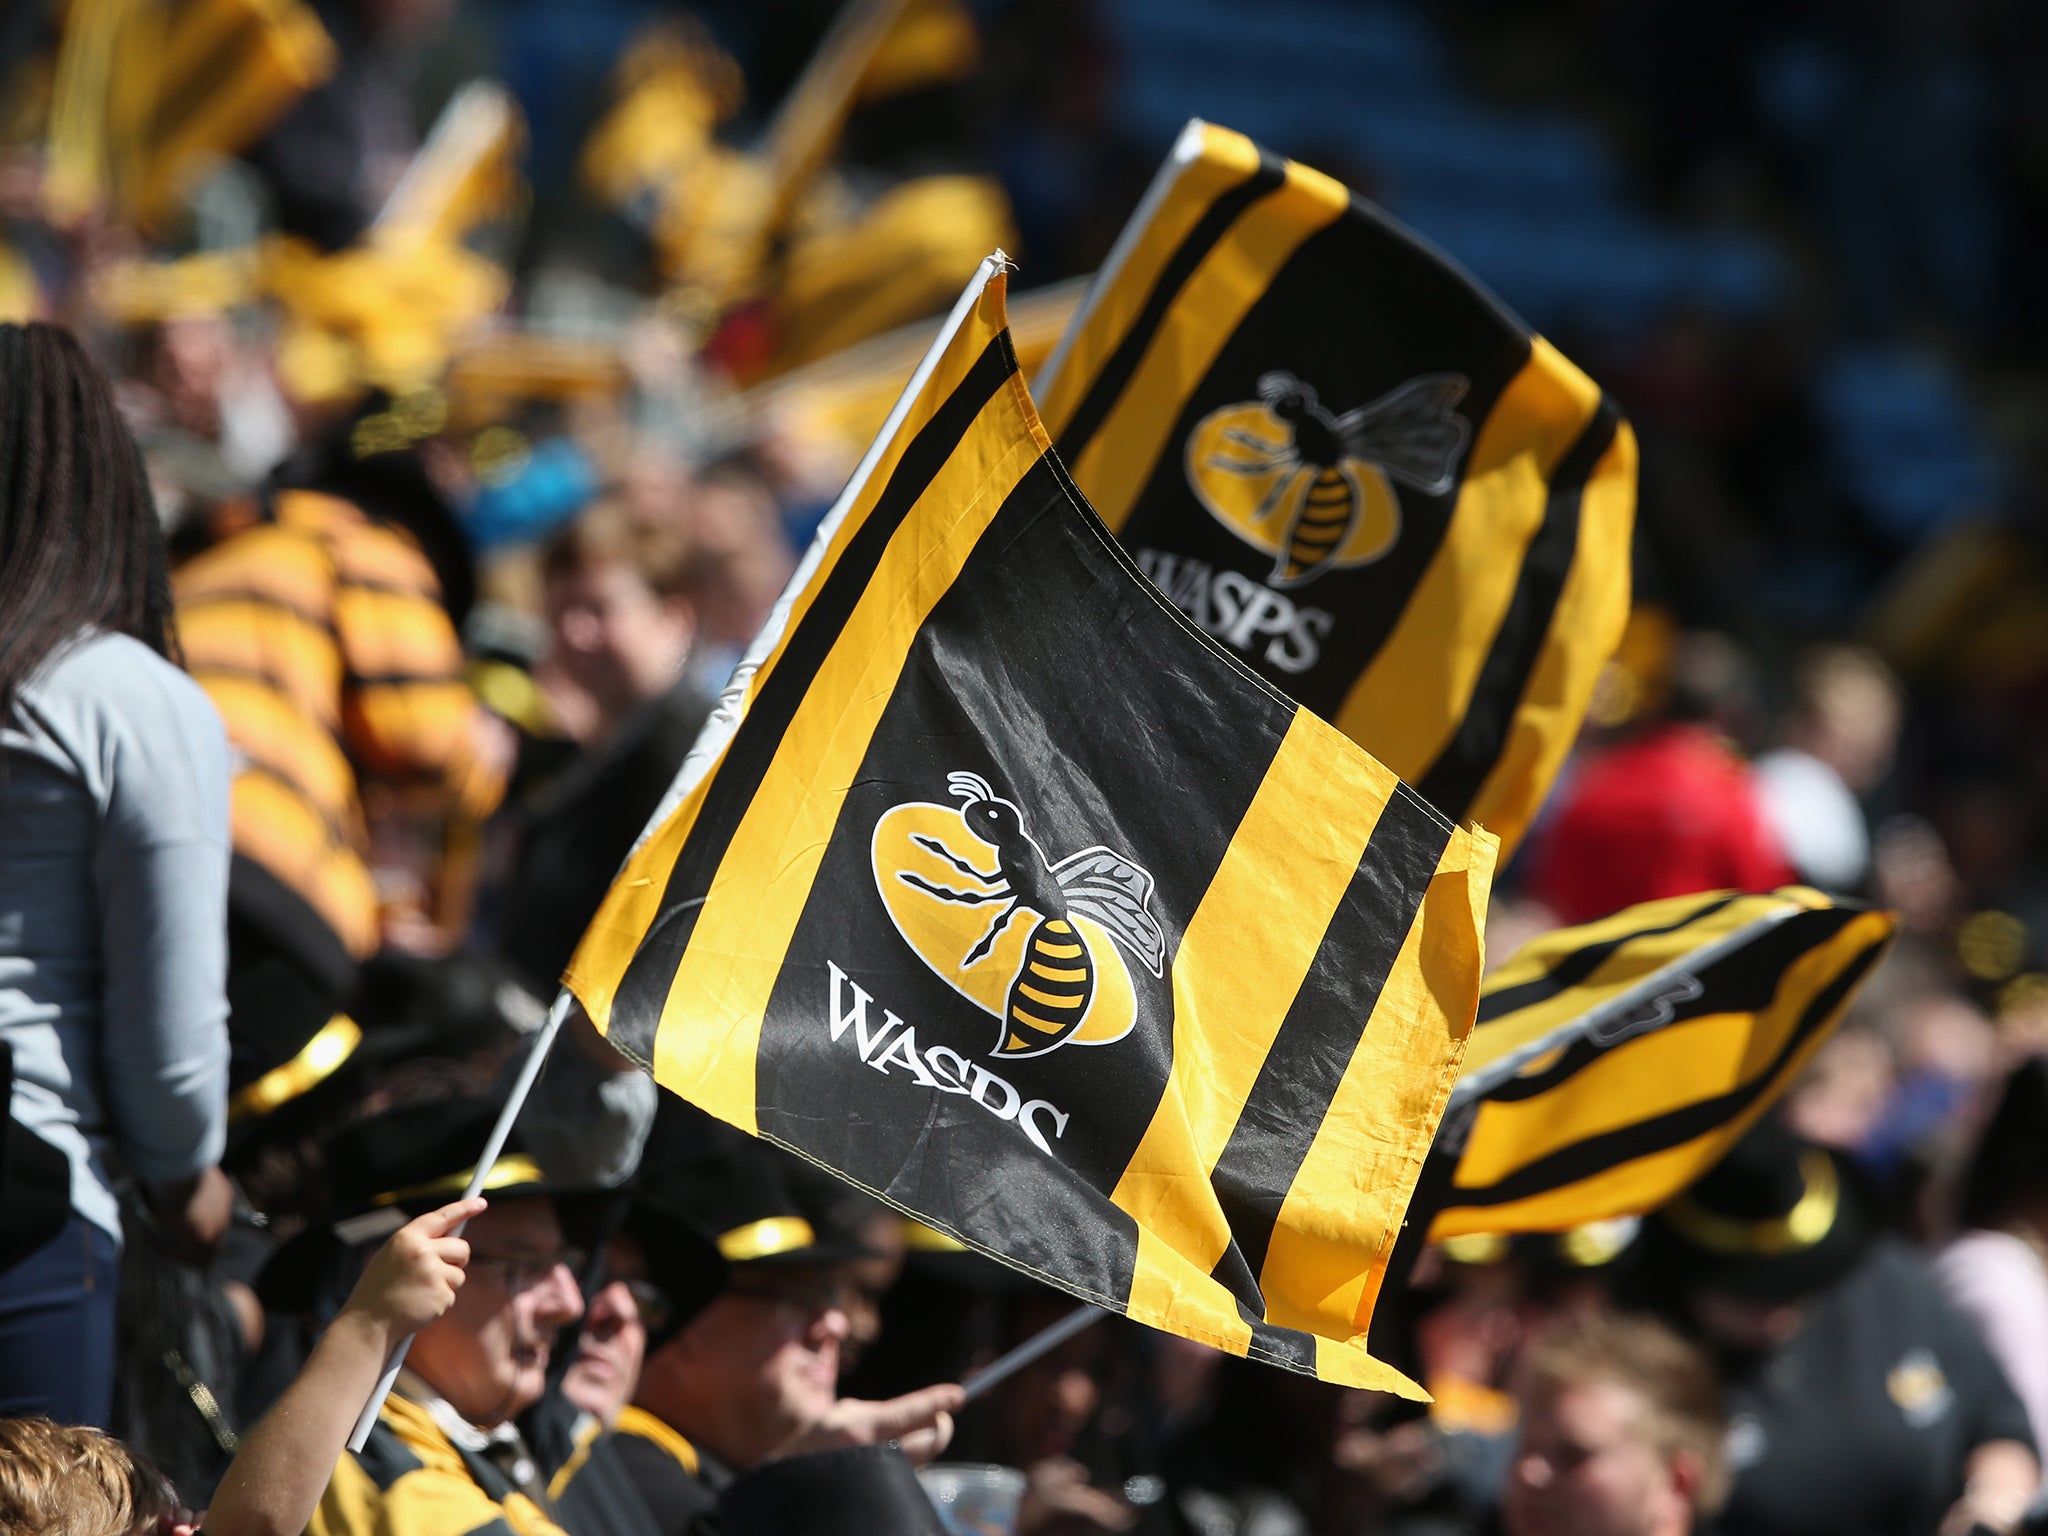 Wasps fans at the Ricoh Arena